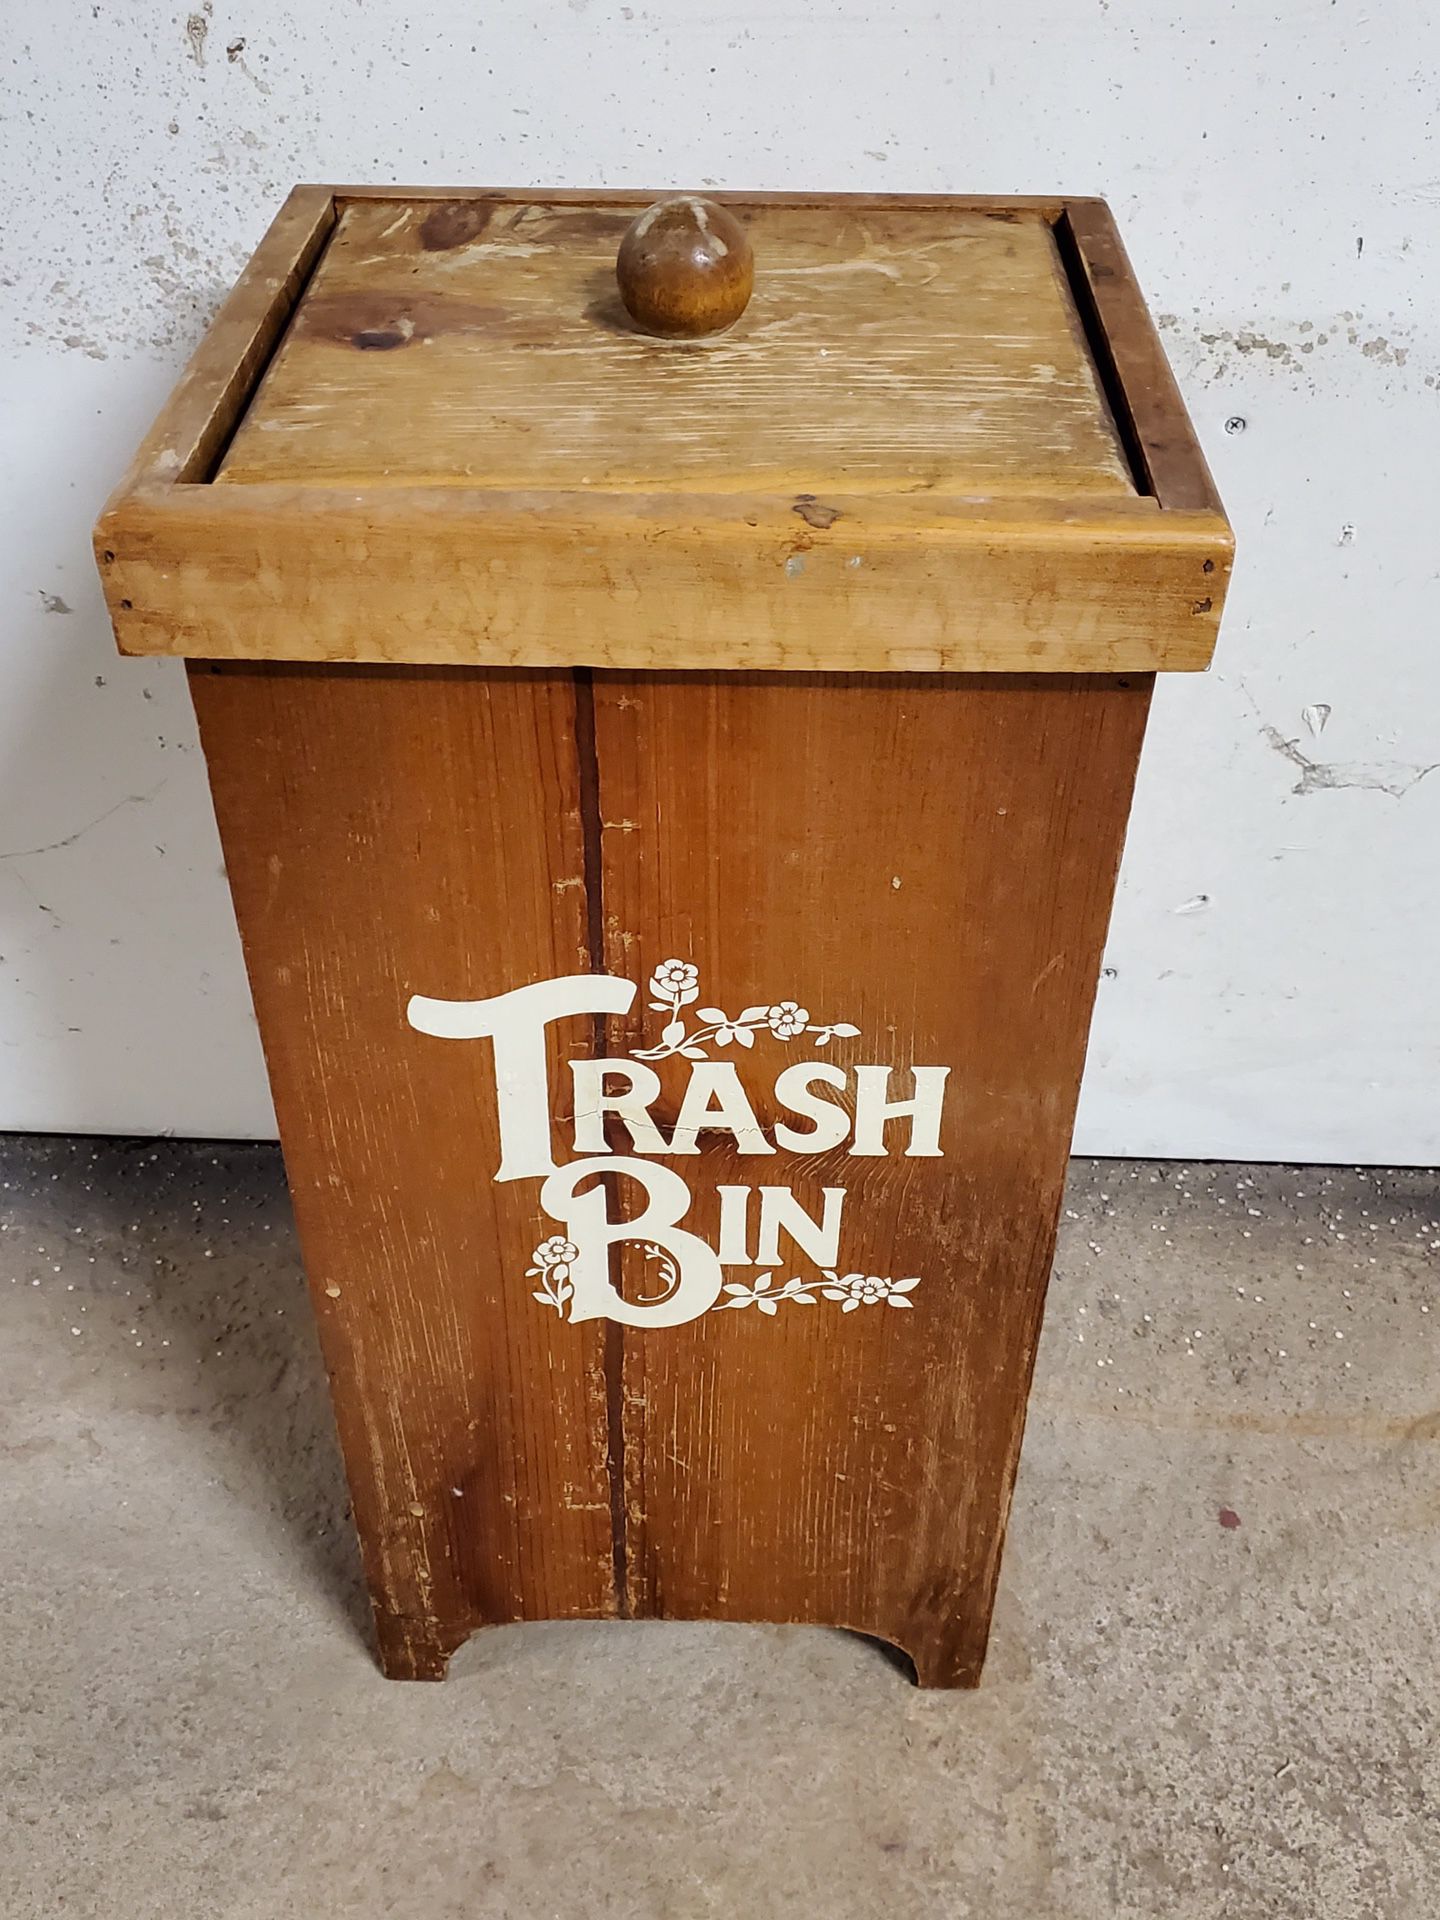 SMALL (10-gal), HEAVY WEATHERED-WOOD, LIDDED OUTDOOR TRASH BIN - firm price.